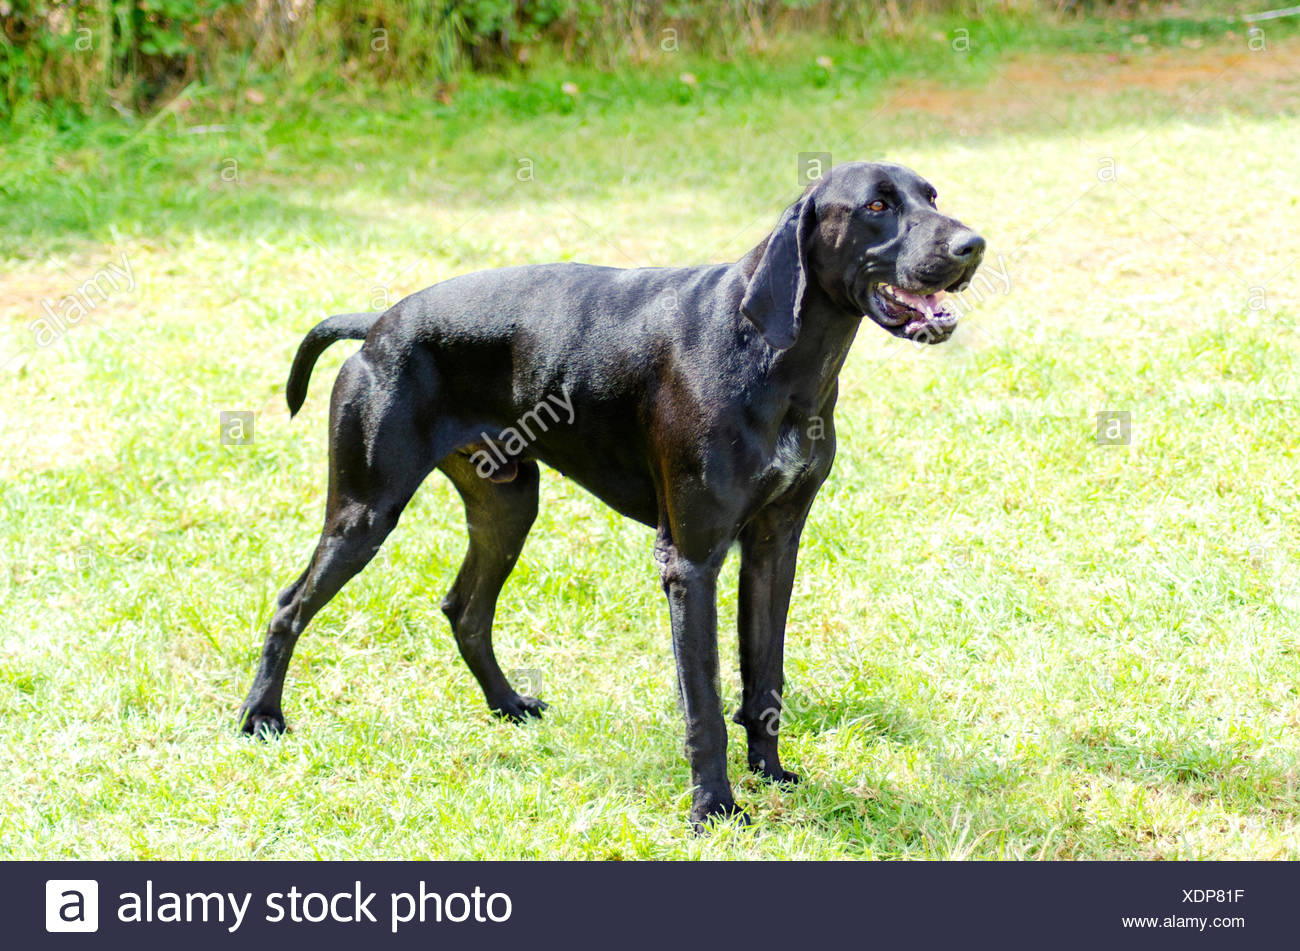 A Young Beautiful Black German Shorthaired Pointer Dog Standing On The Grass The German Short Haired Pointing Dog Has Long Floppy Ears And Muzzle And Is Used For Hunting Stock Photo Alamy